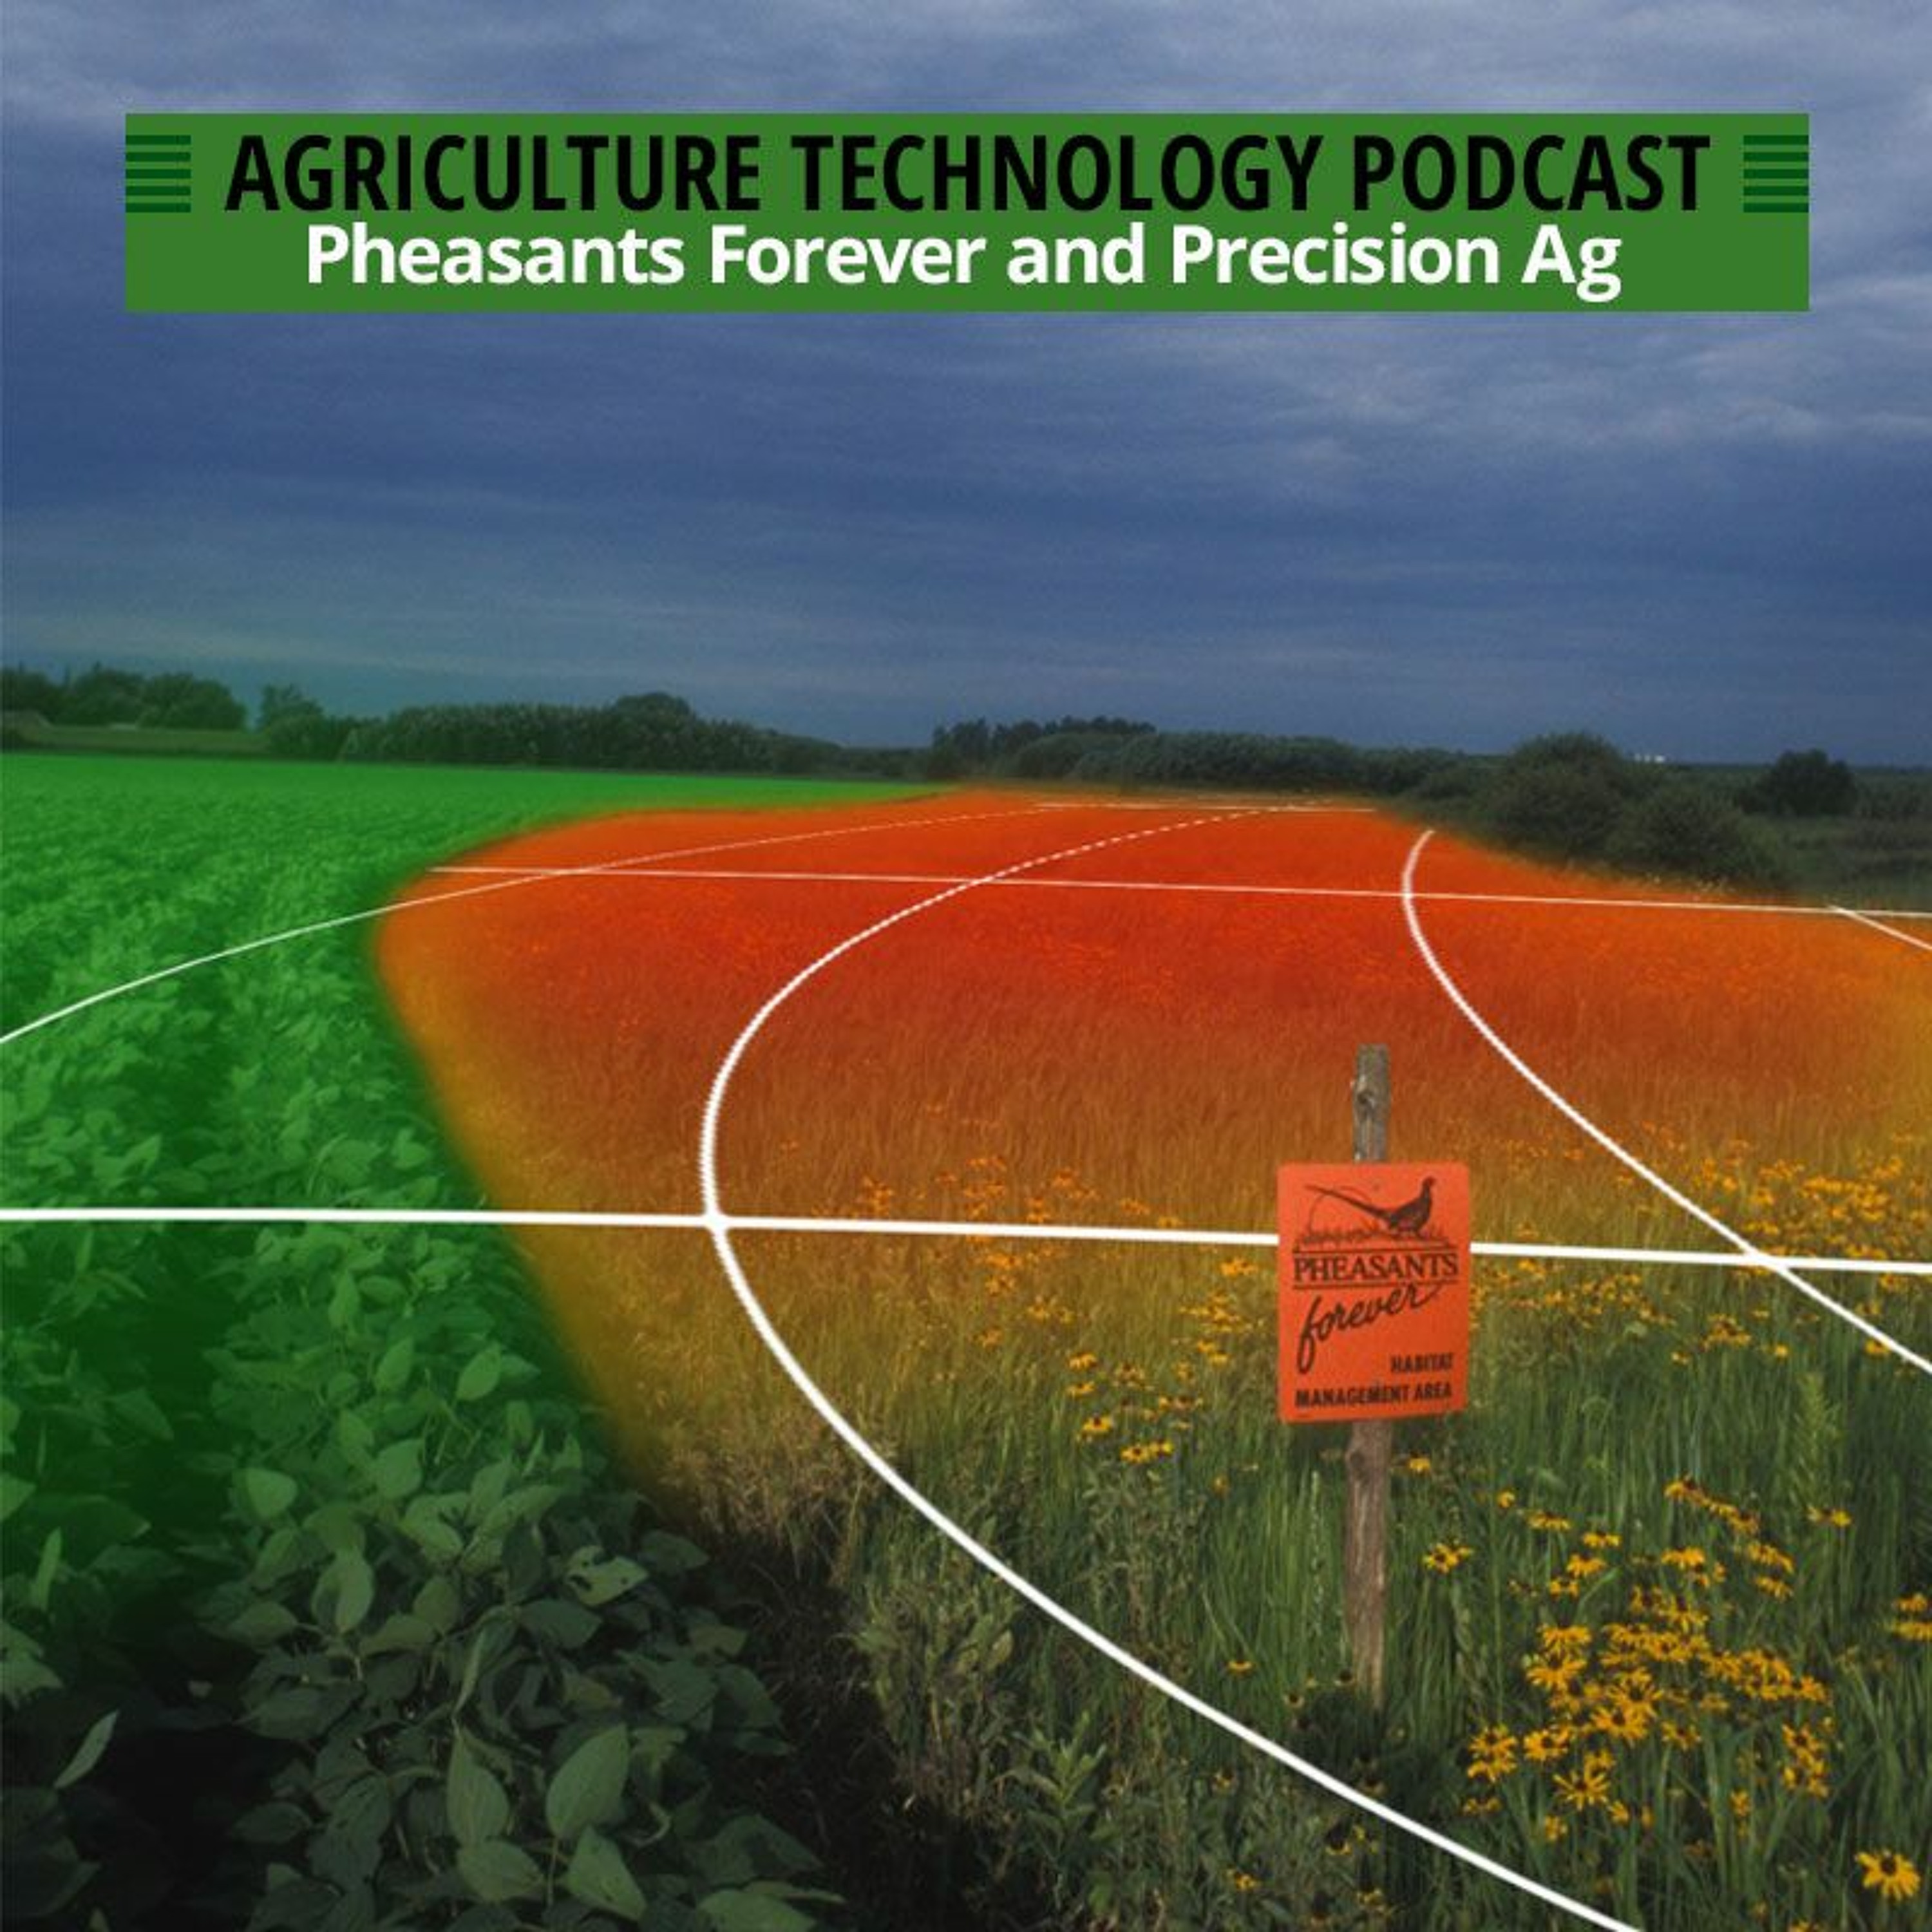 Ep. 89 Pheasants Forever And Precision Ag